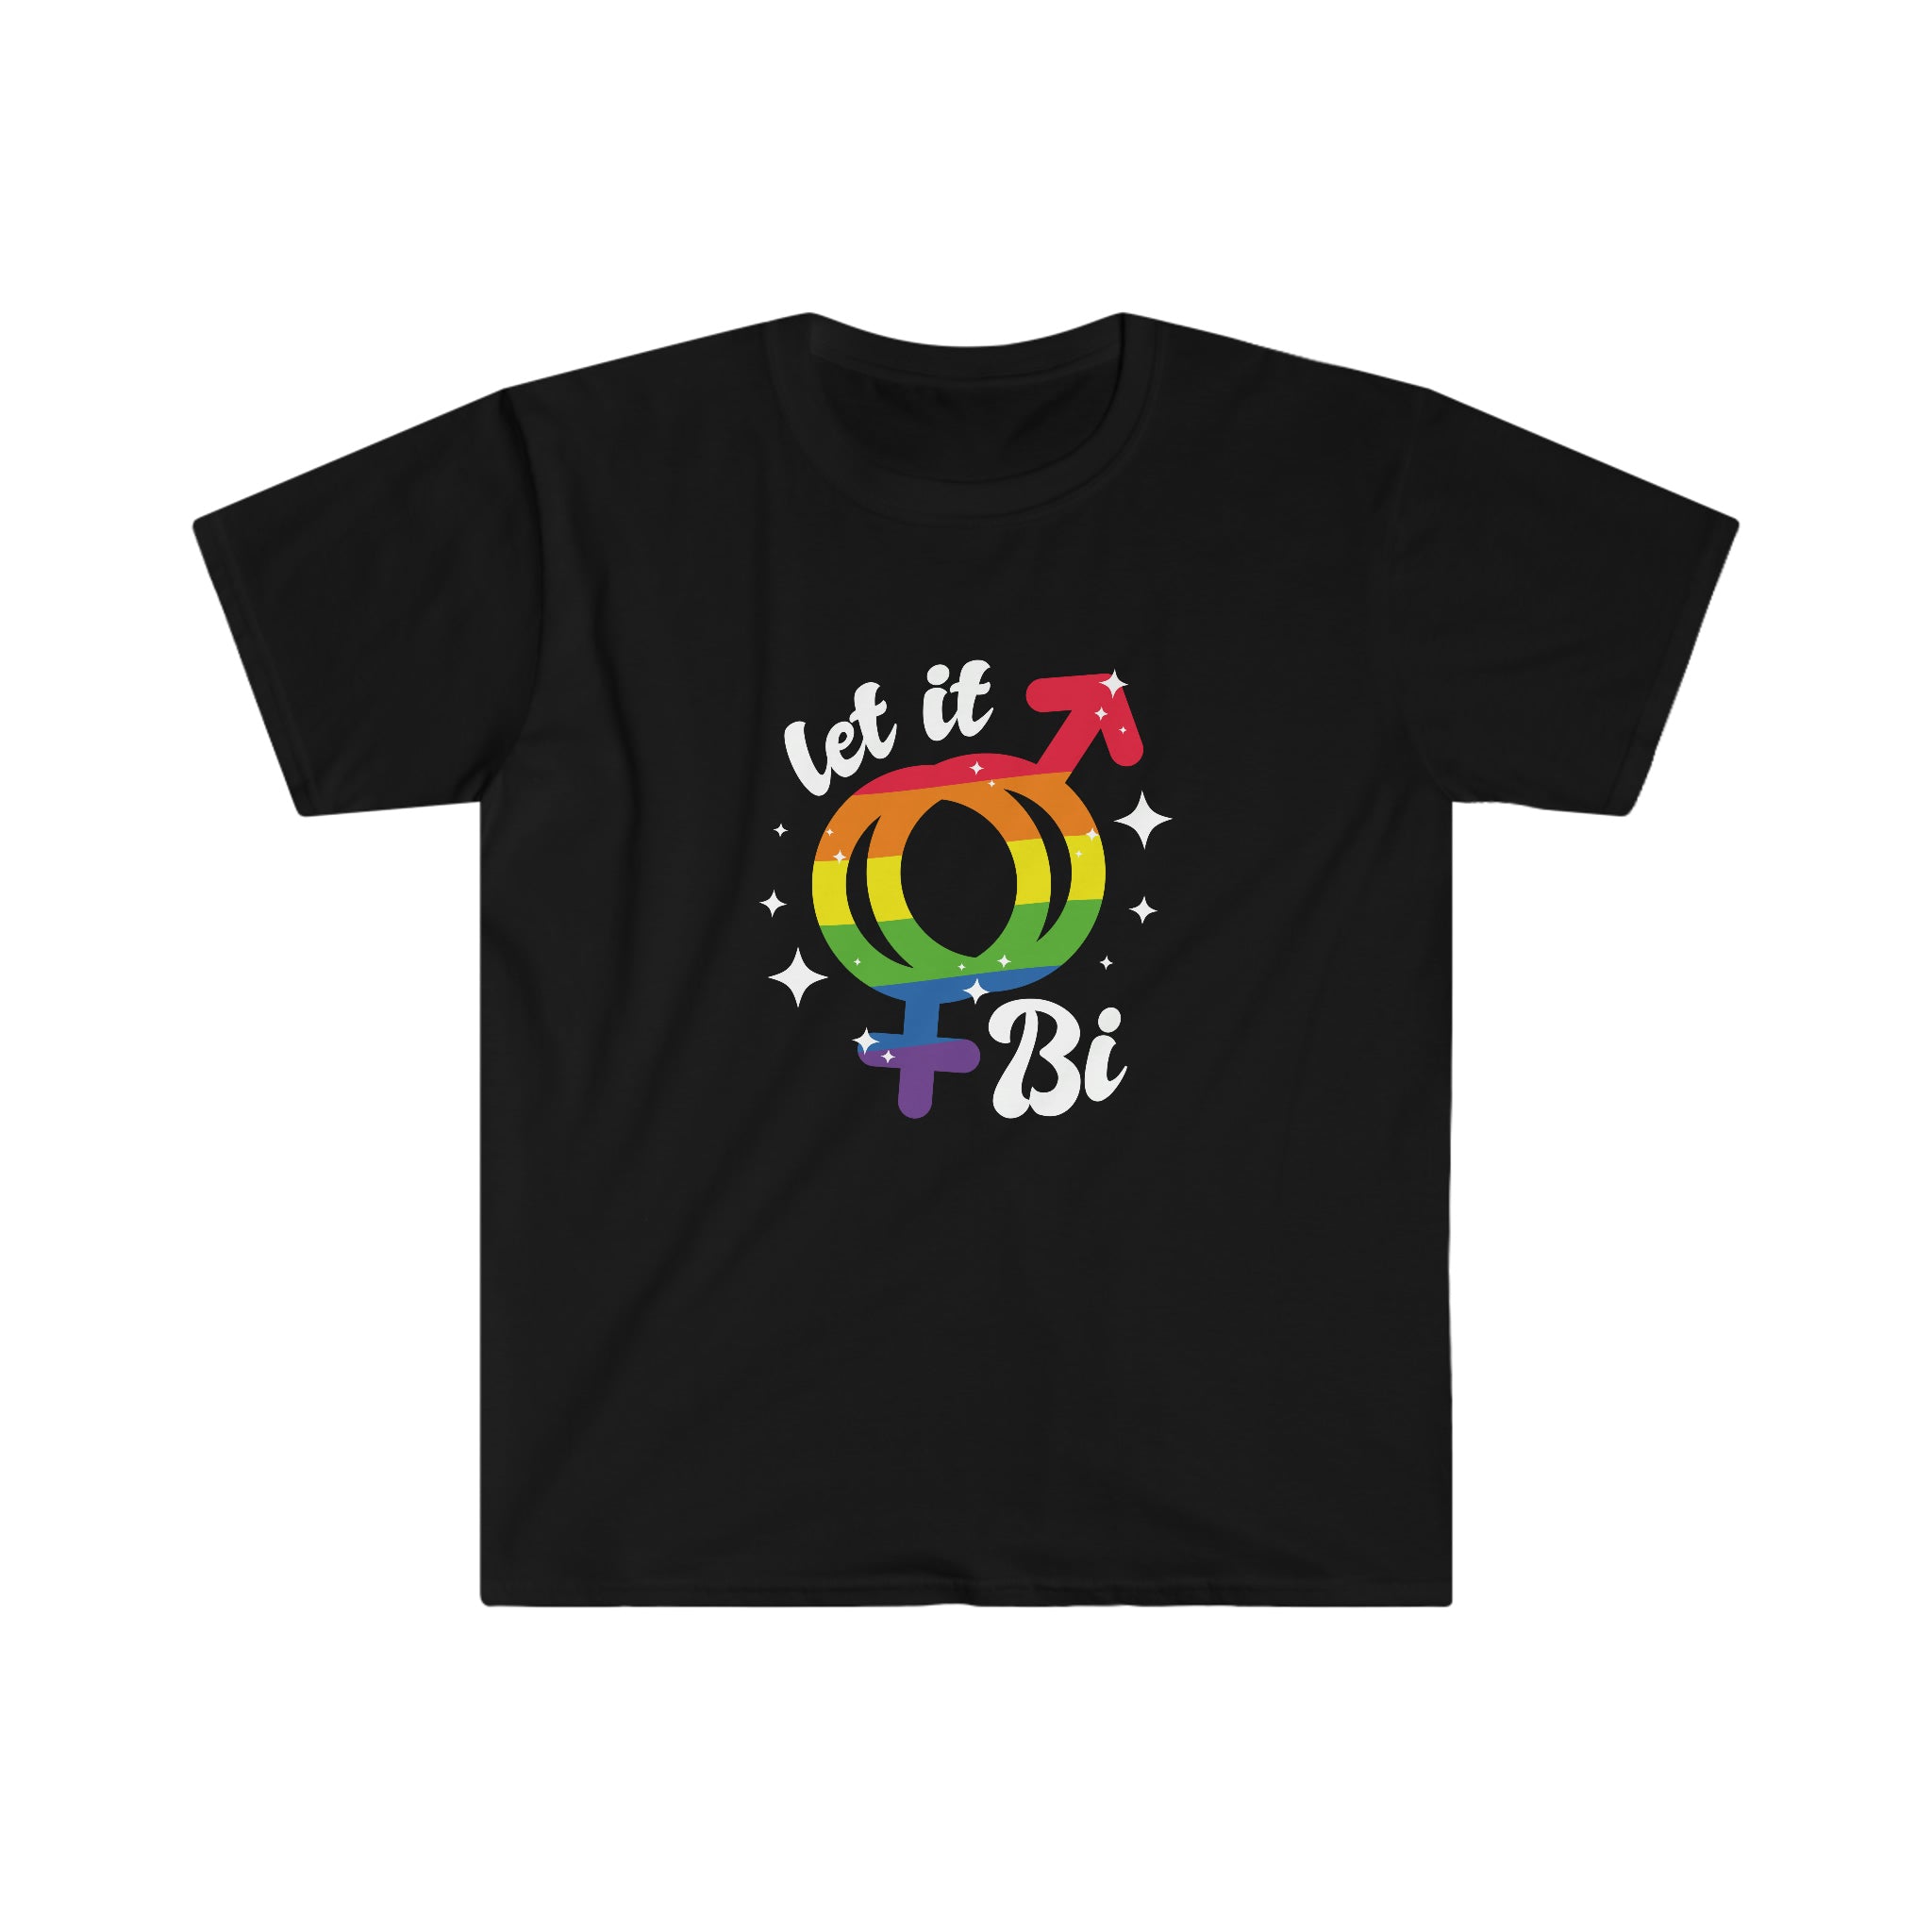 Let the Let it Bi T-Shirt! This black t-shirt proudly features the bi flag, embracing and celebrating your bi-curious side.